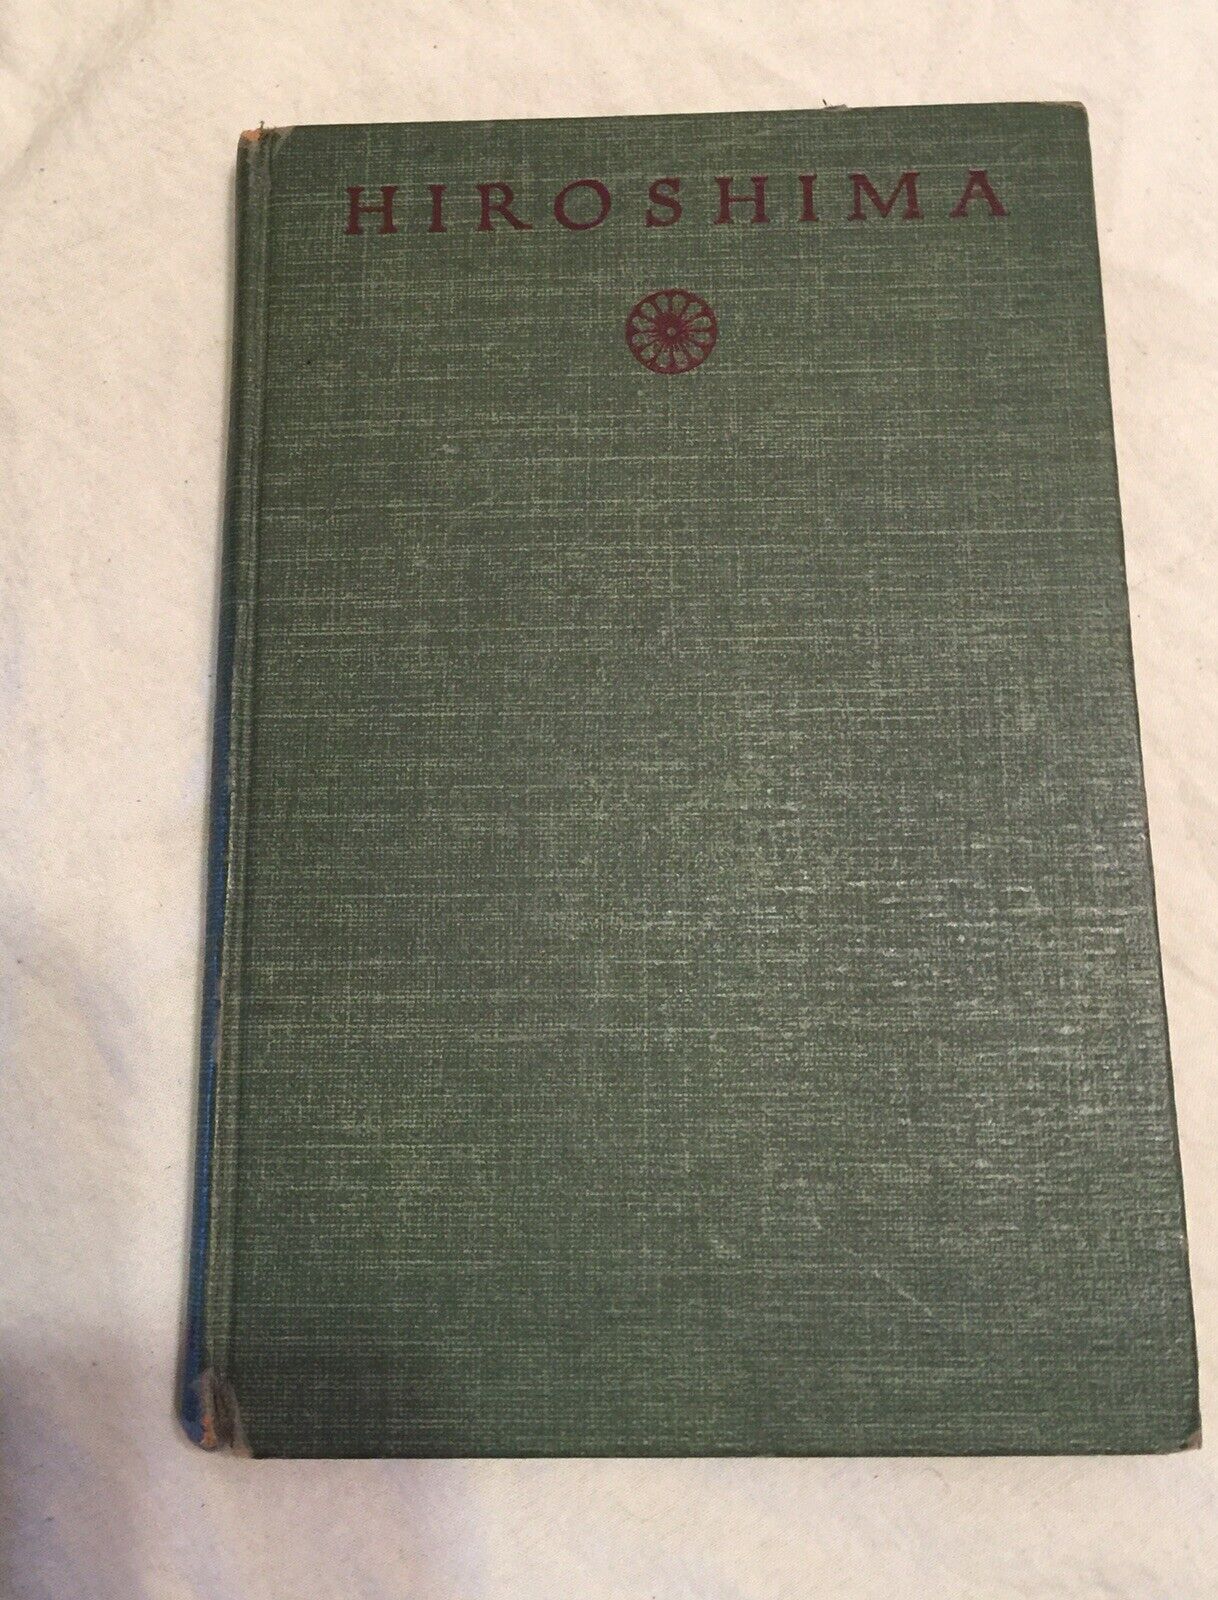 Vintage 1946 HIROSHIMA book by John Hersey published by Alfred A. Knopf